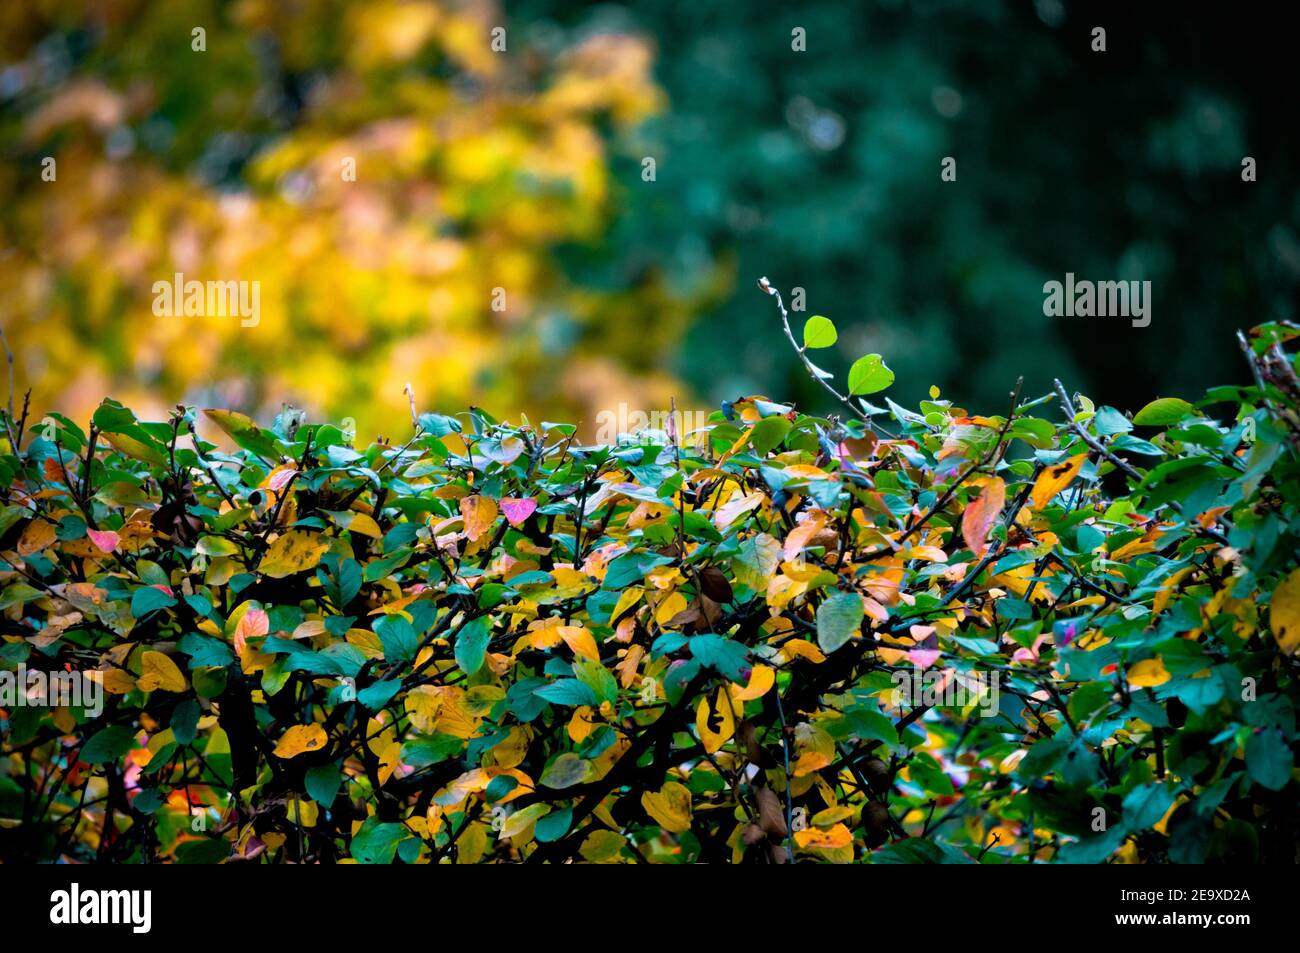 Background of neatly manicured bushes covered with colorful leaves in autumn Stock Photo